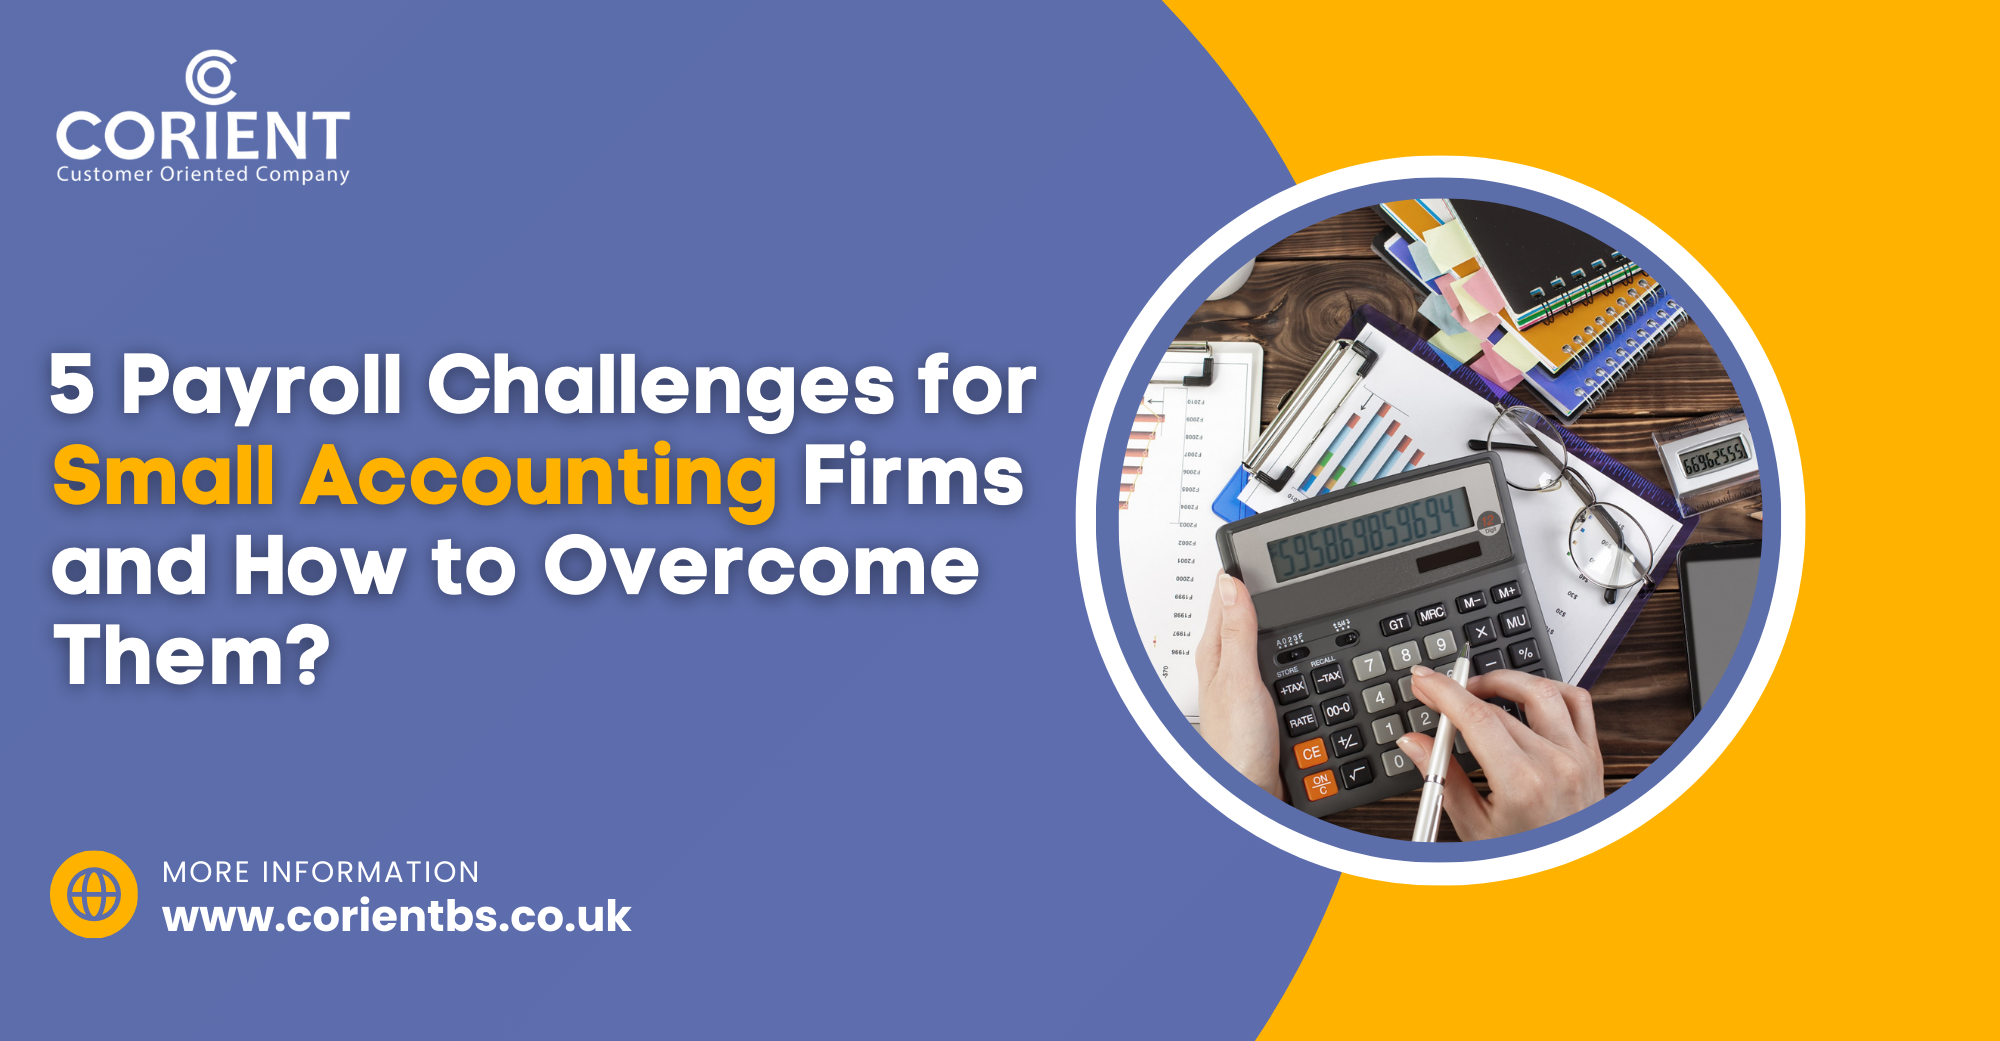 5 Payroll Challenges for Small Accounting Firms and How to Overcome Them?